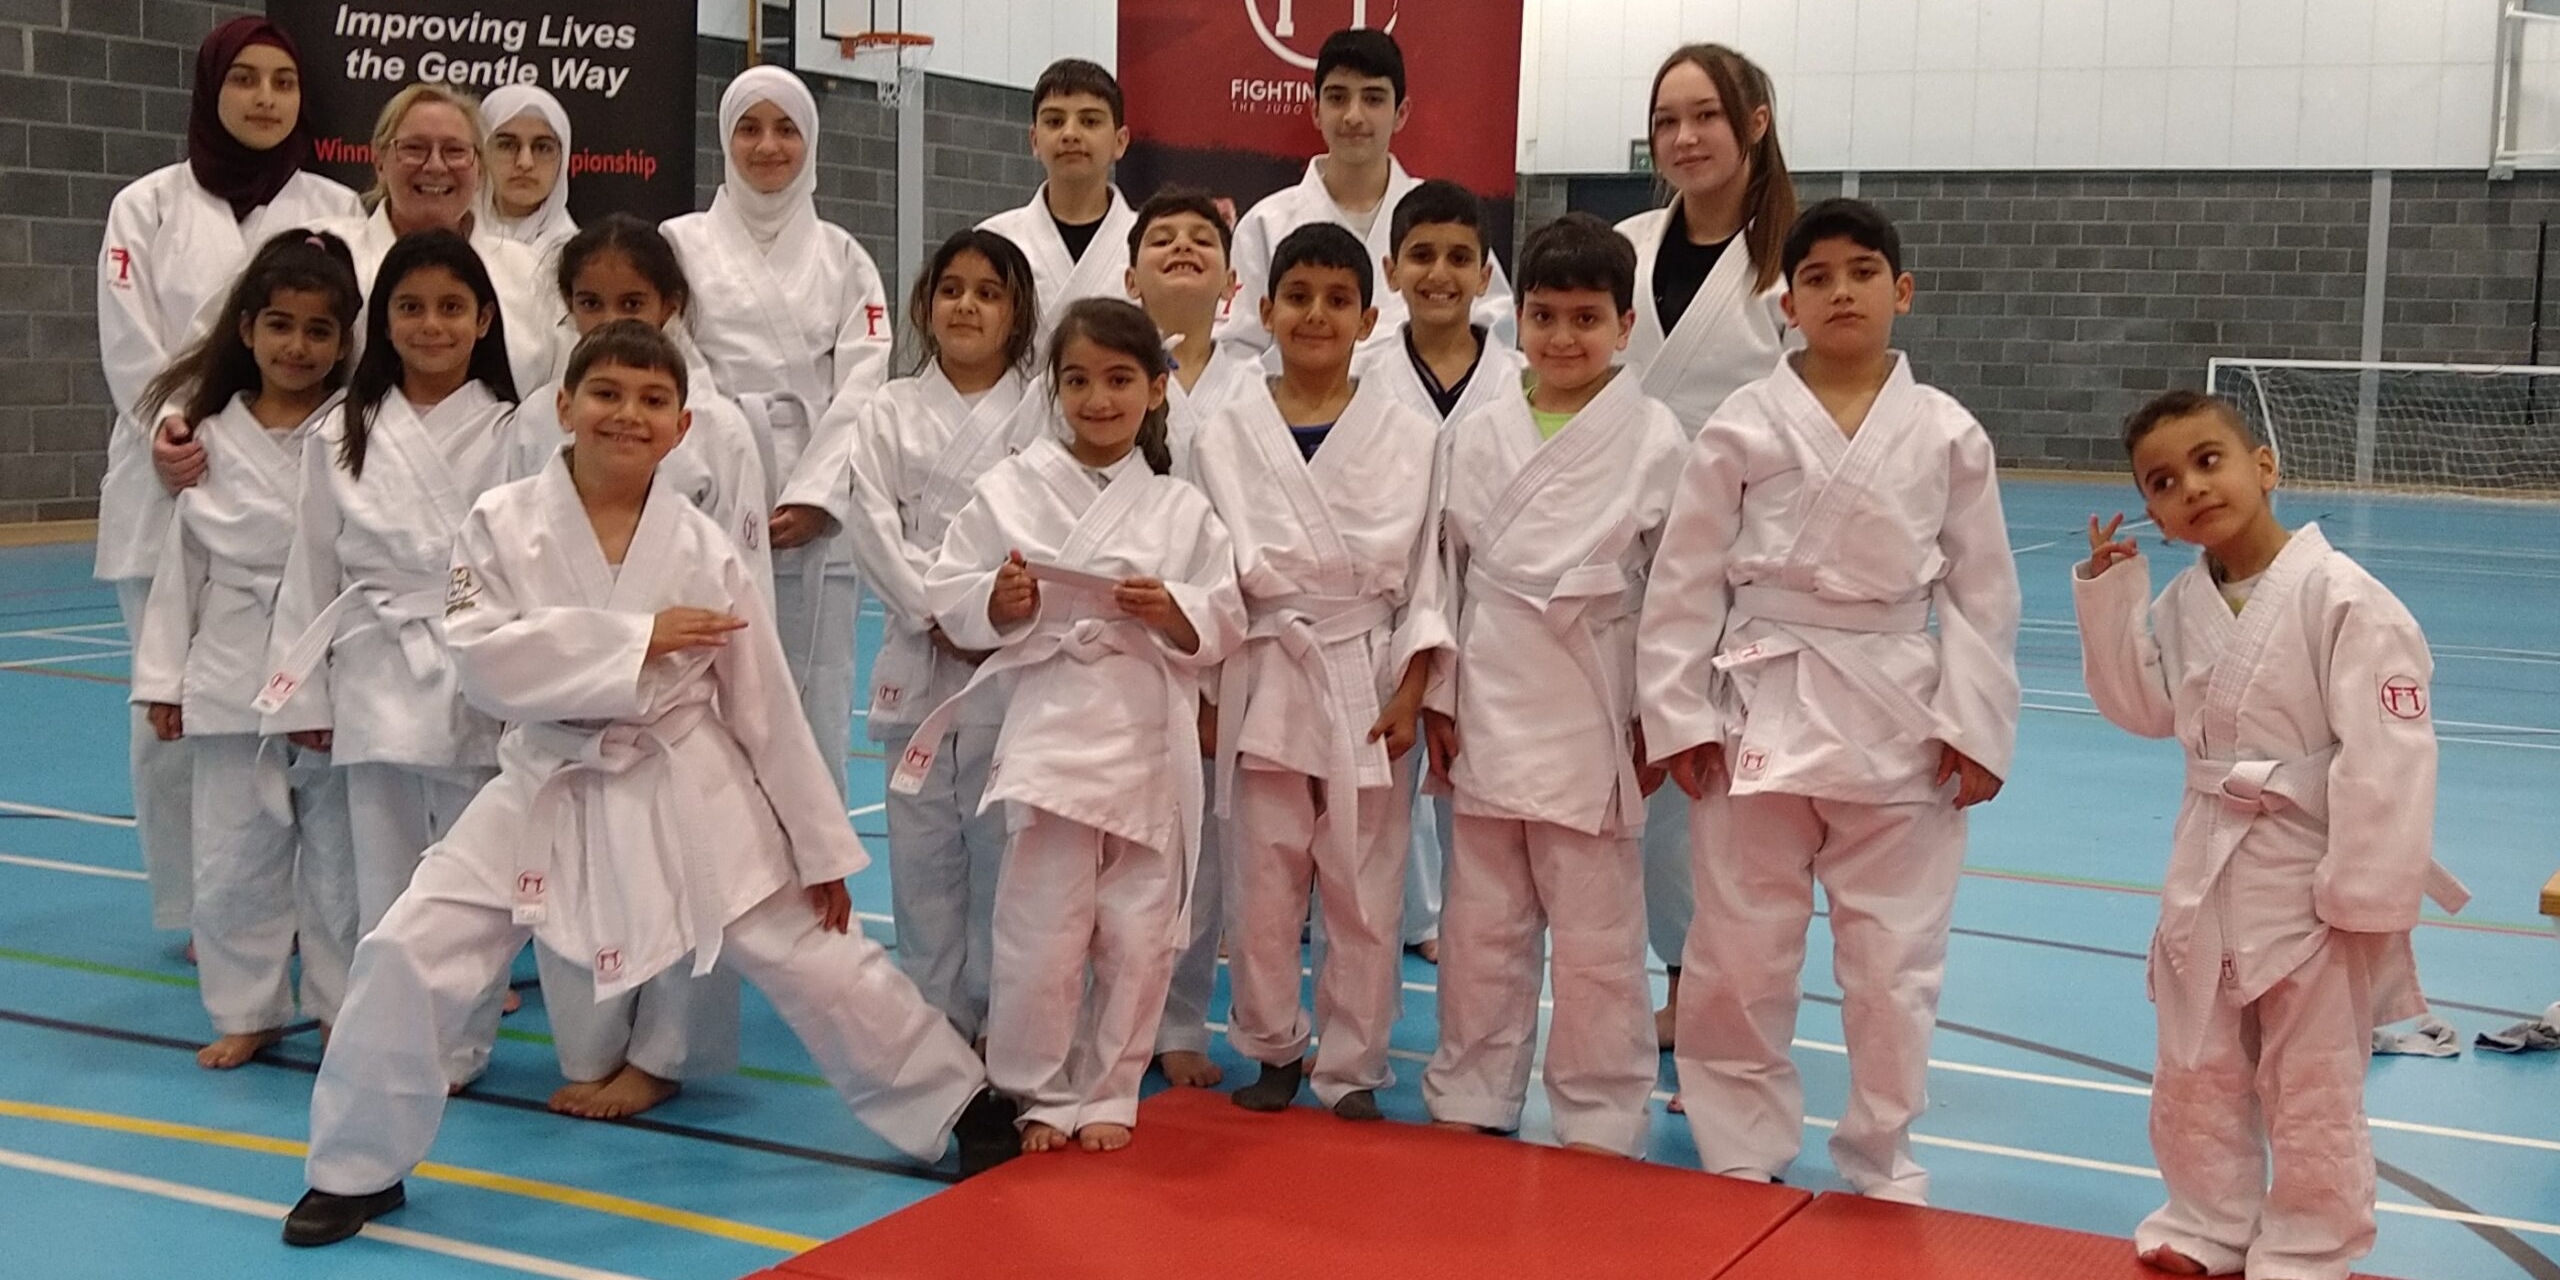 A photo of some of the children who took part in the class.